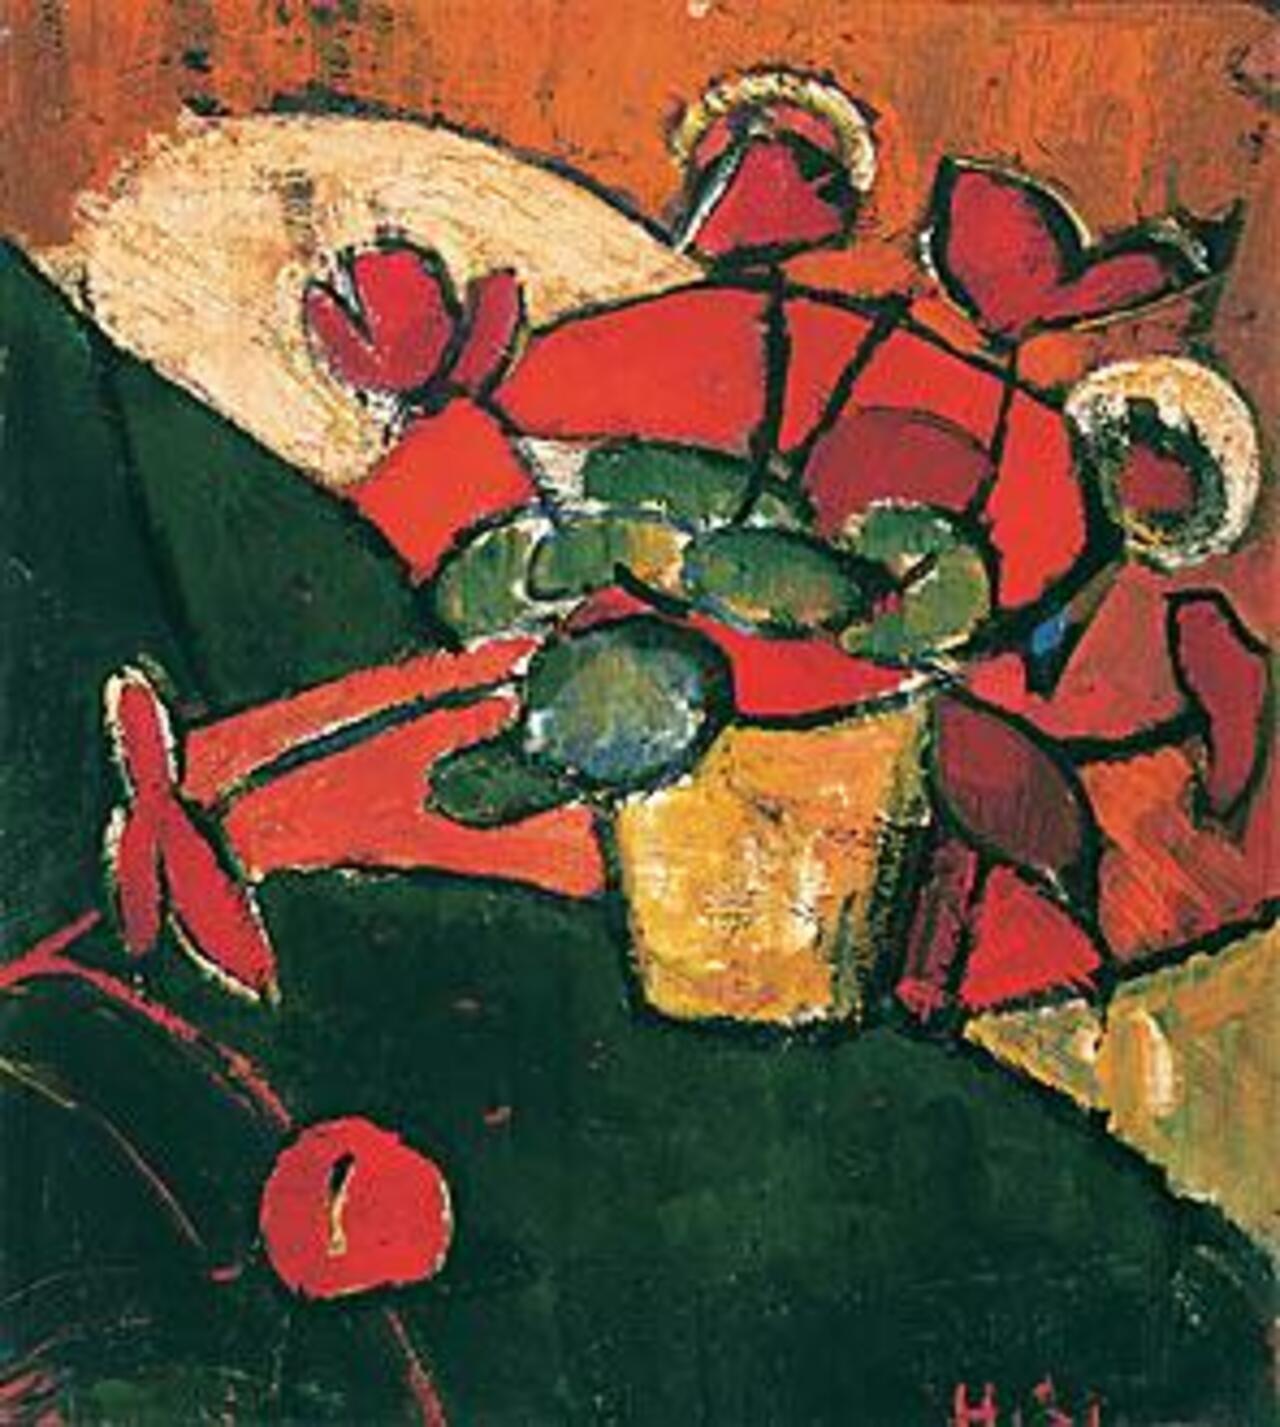 Correction of previous tweet: It's Hermann Stenner, (not Herbert) gifted painter who died in WWI #art #expressionism http://t.co/UzAlYAyzJH